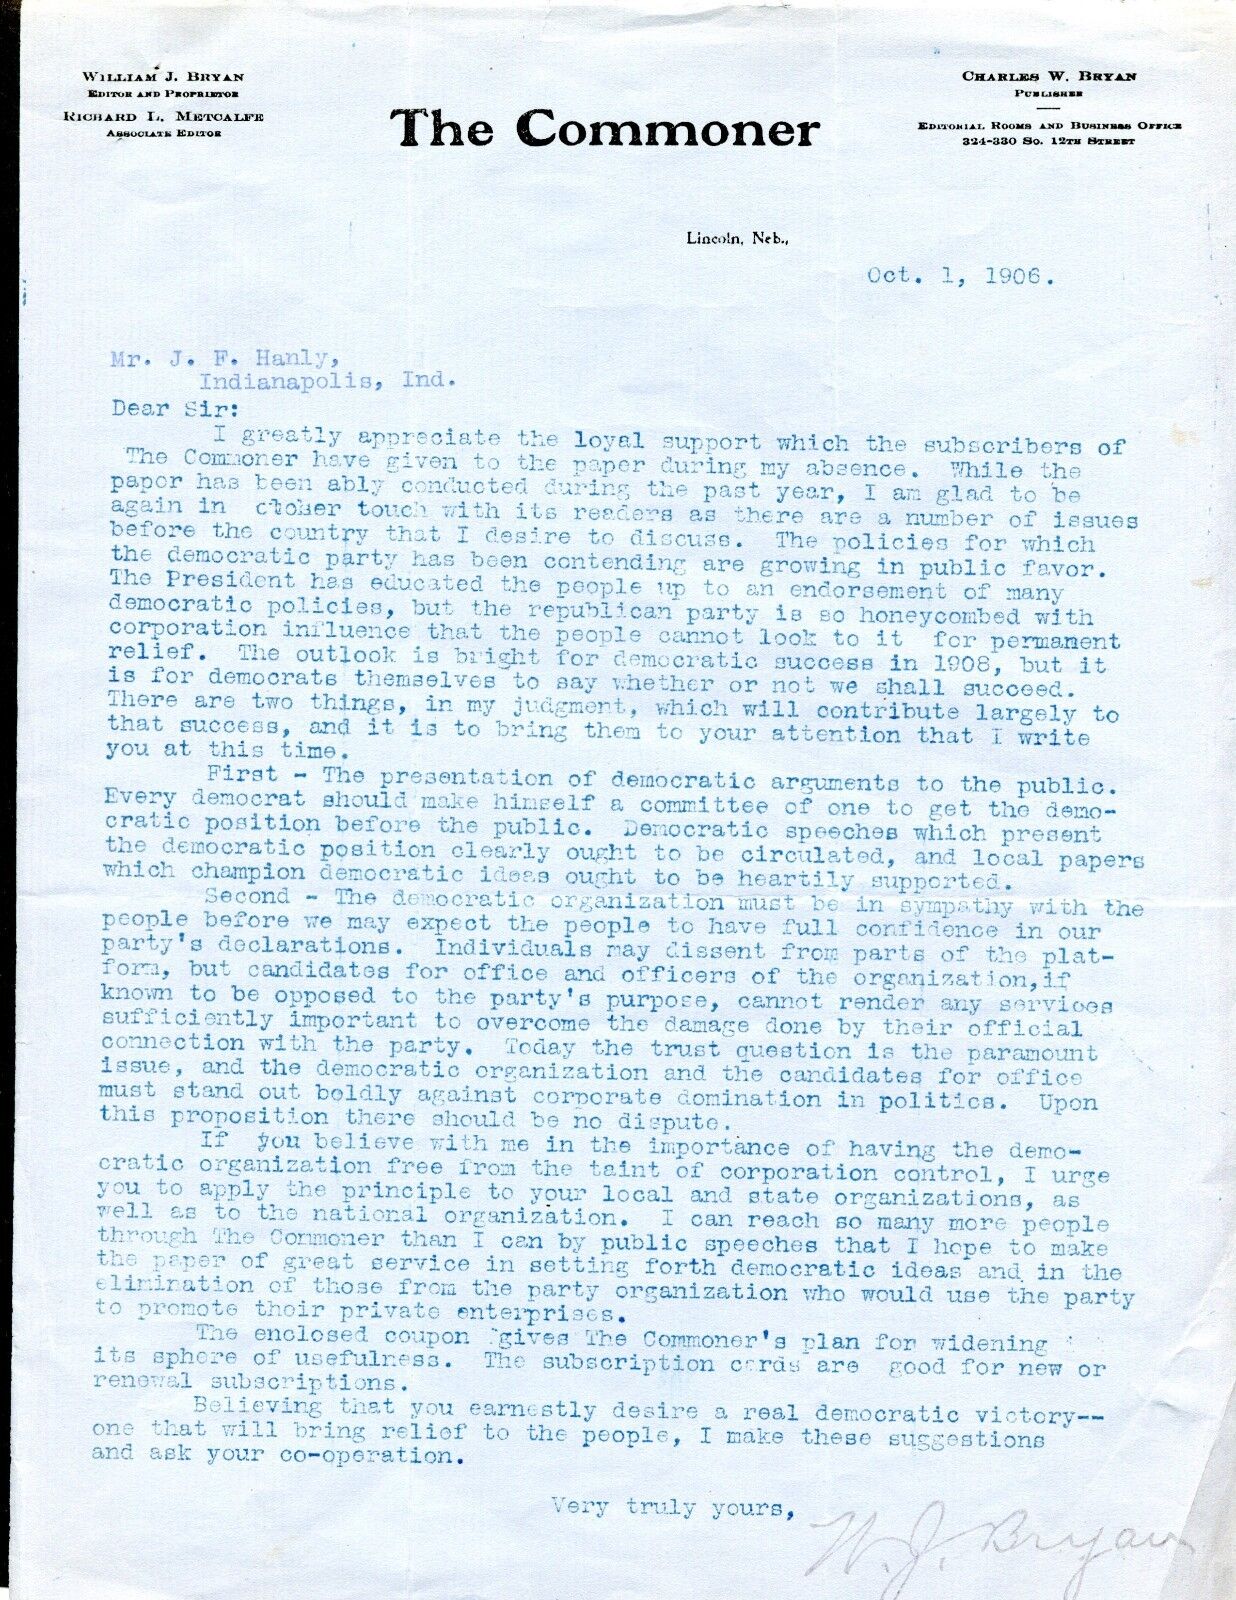 WILLIAM JENNINGS BRYAN TYPED LTR SIGNED ON HIS 1908 U.S. PRESIDENT CAMPAIGN